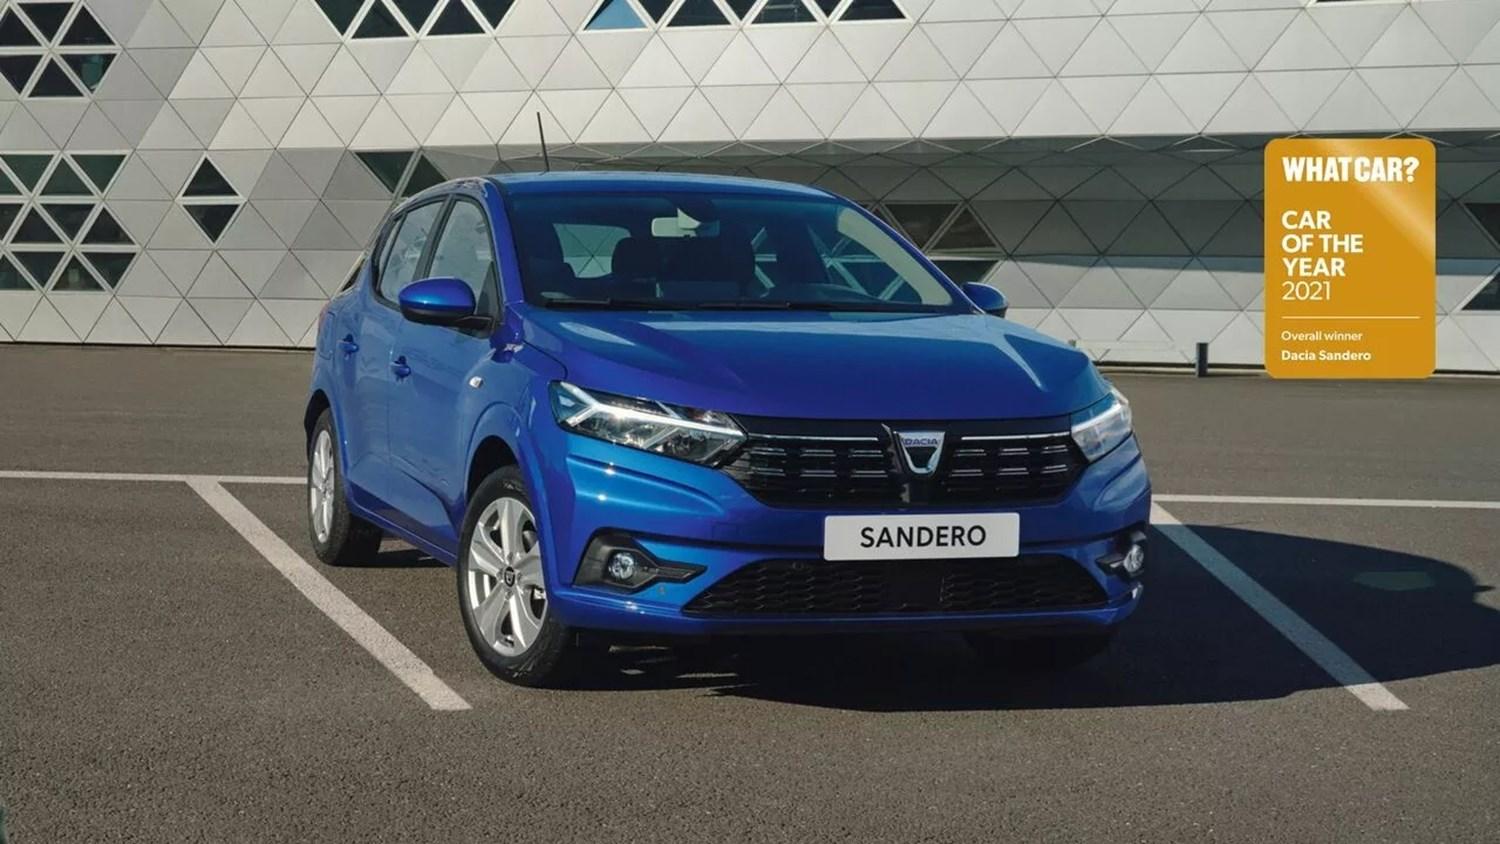 Blue Dacia Sandero parked in car parking space